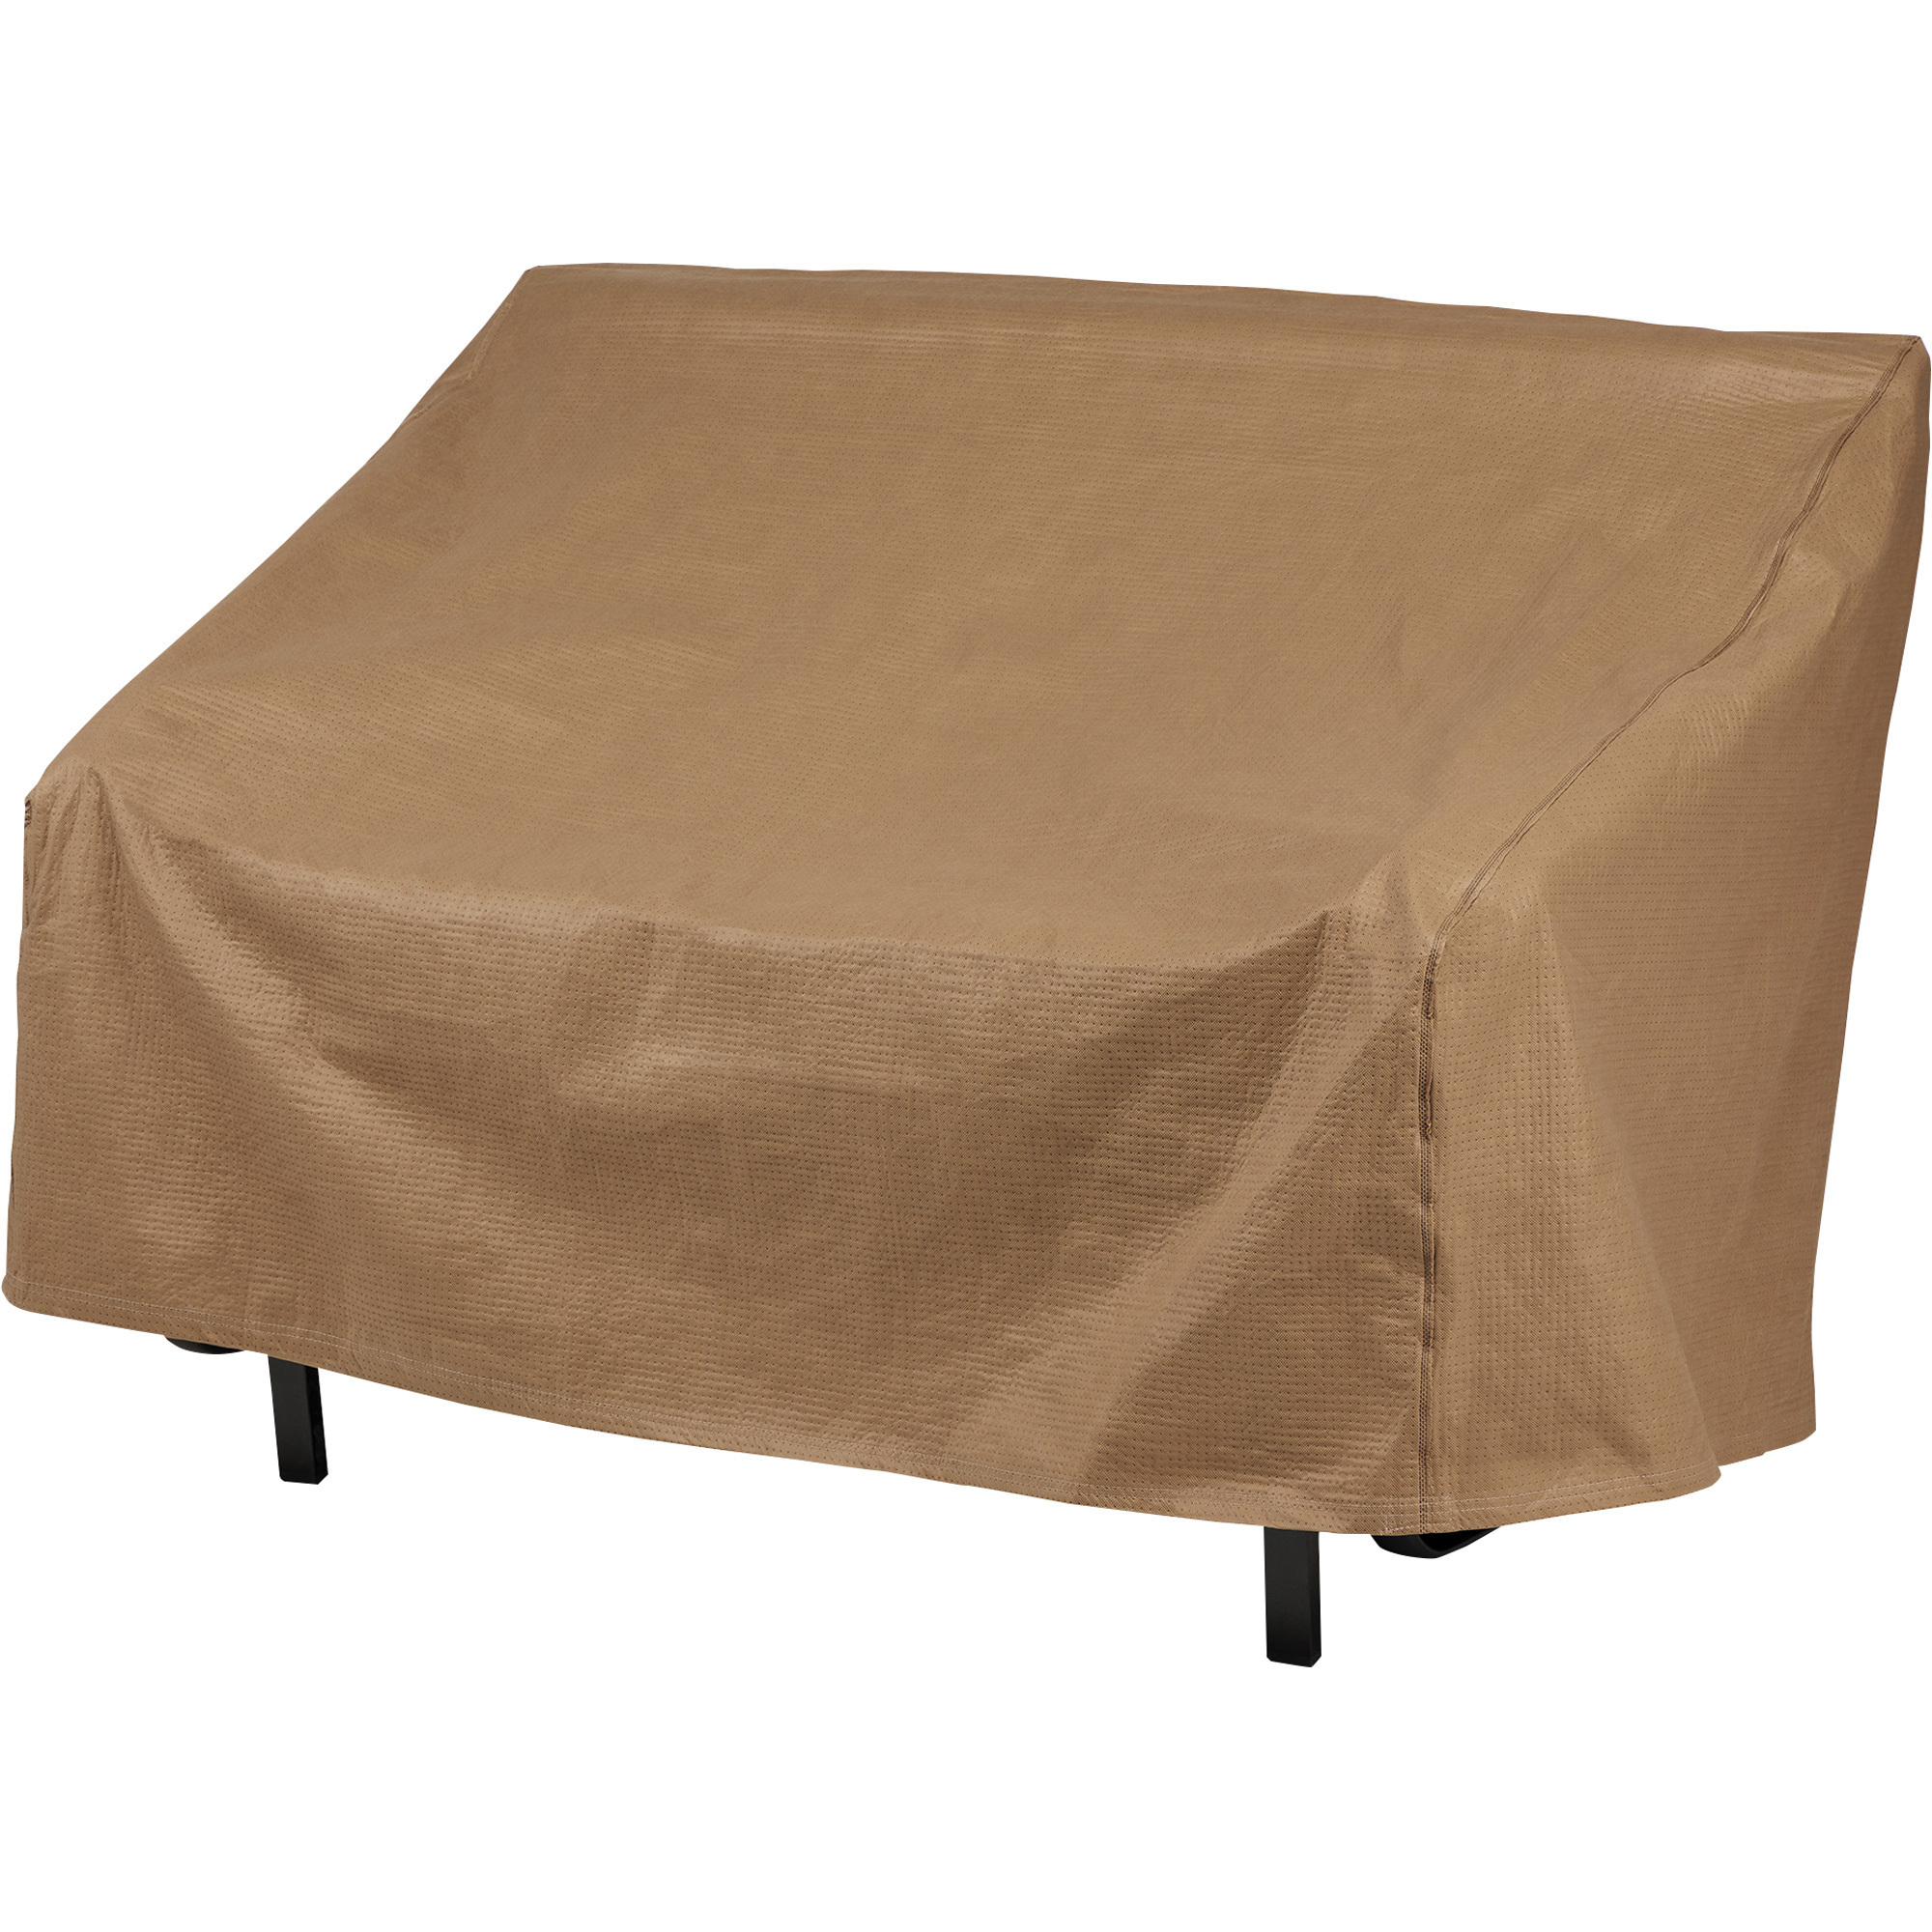 Classic Accessories Duck Covers Essential 51Inch Patio Bench Cover, Latte, Model EBN533135